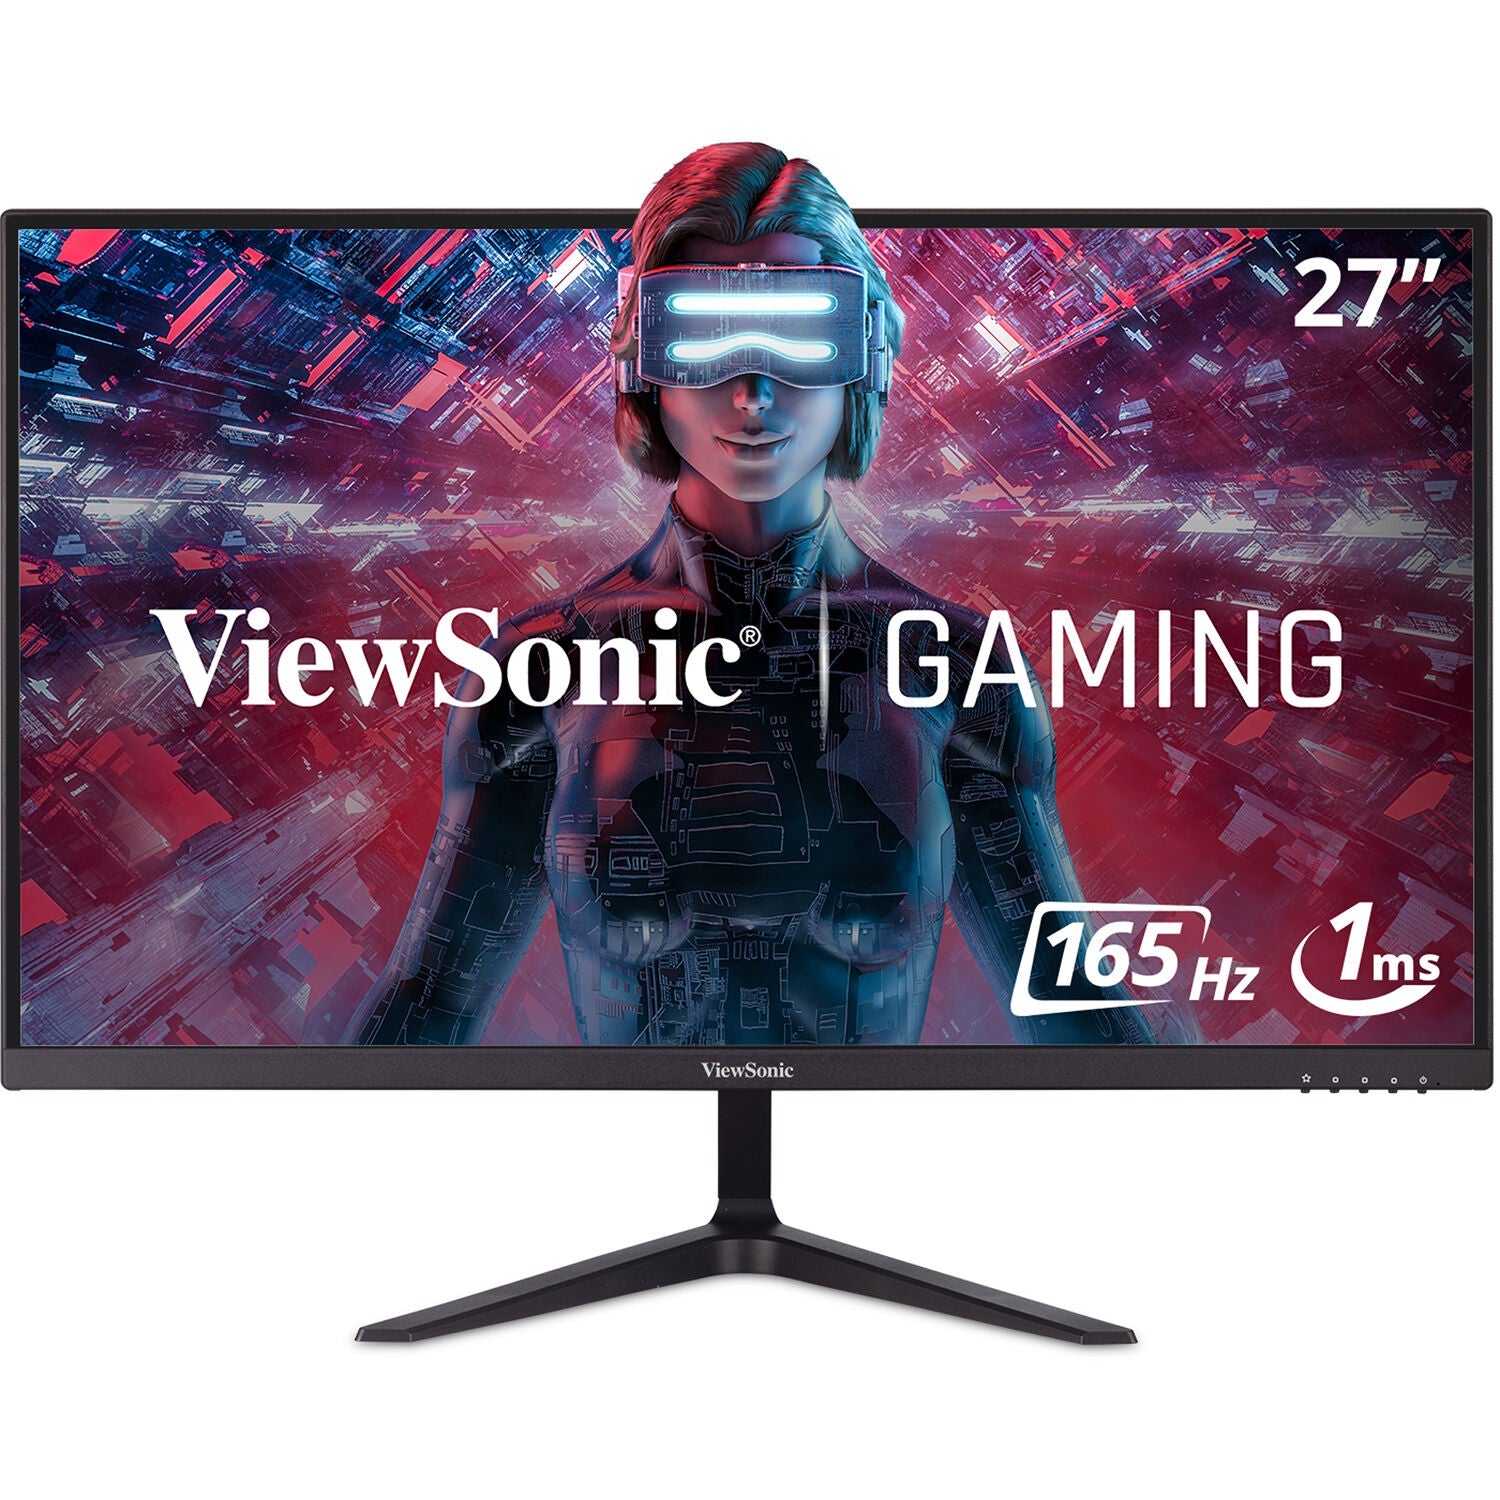 ViewSonic VX2718-P-MHD-S 27" 16:9 165 Hz Curved LCD Gaming Monitor - Certified Refurbished